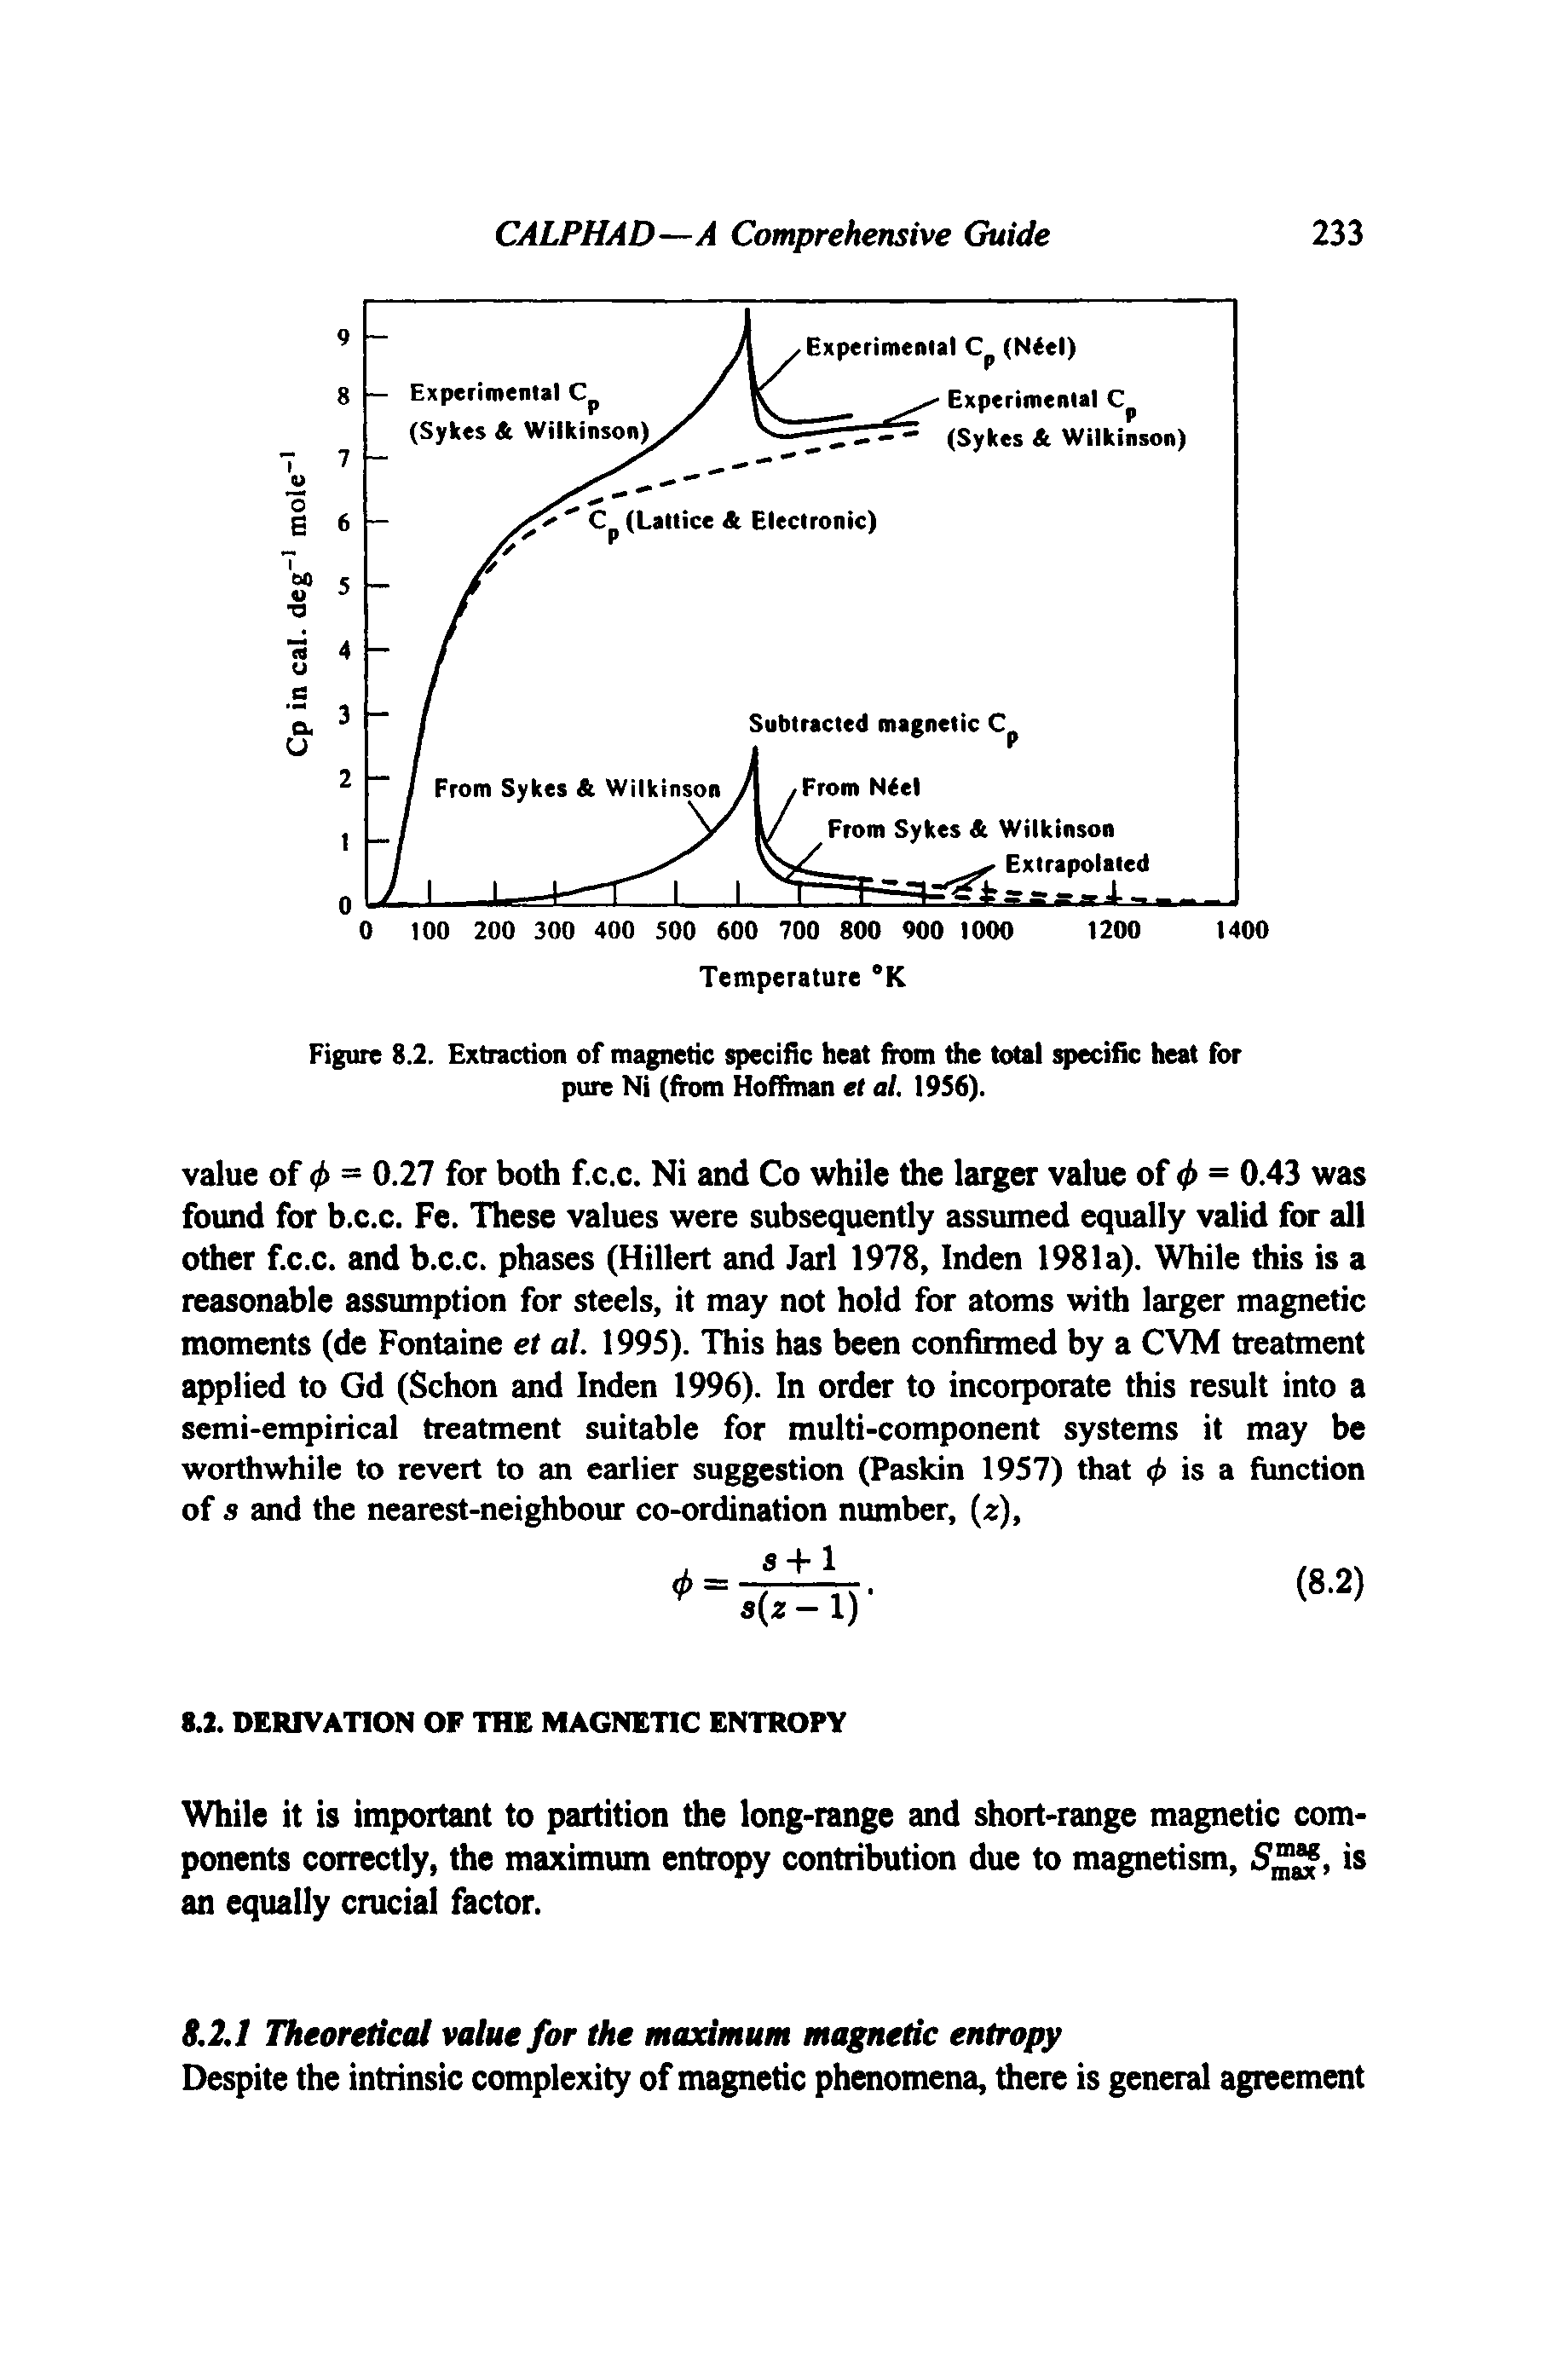 Figure 8.2. Extraction of magnetic specific heat from the total specific heat for pure Ni (from Hoffman et al. 1956).